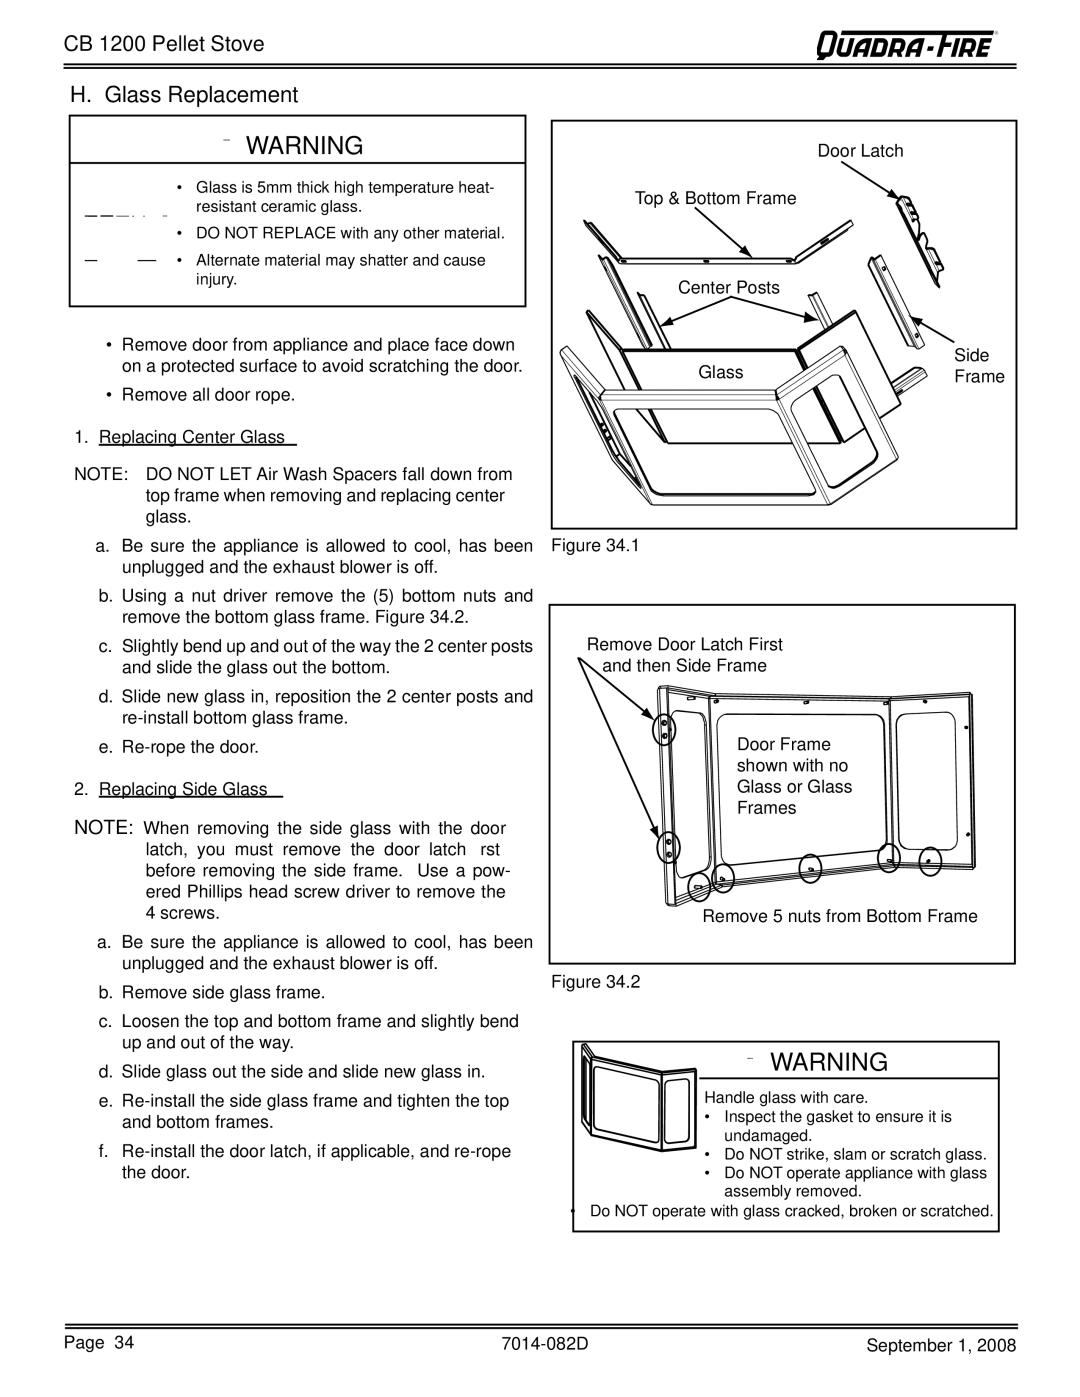 Hearth and Home Technologies CB1200-B owner manual Glass Replacement, Replacing Side Glass Screws 